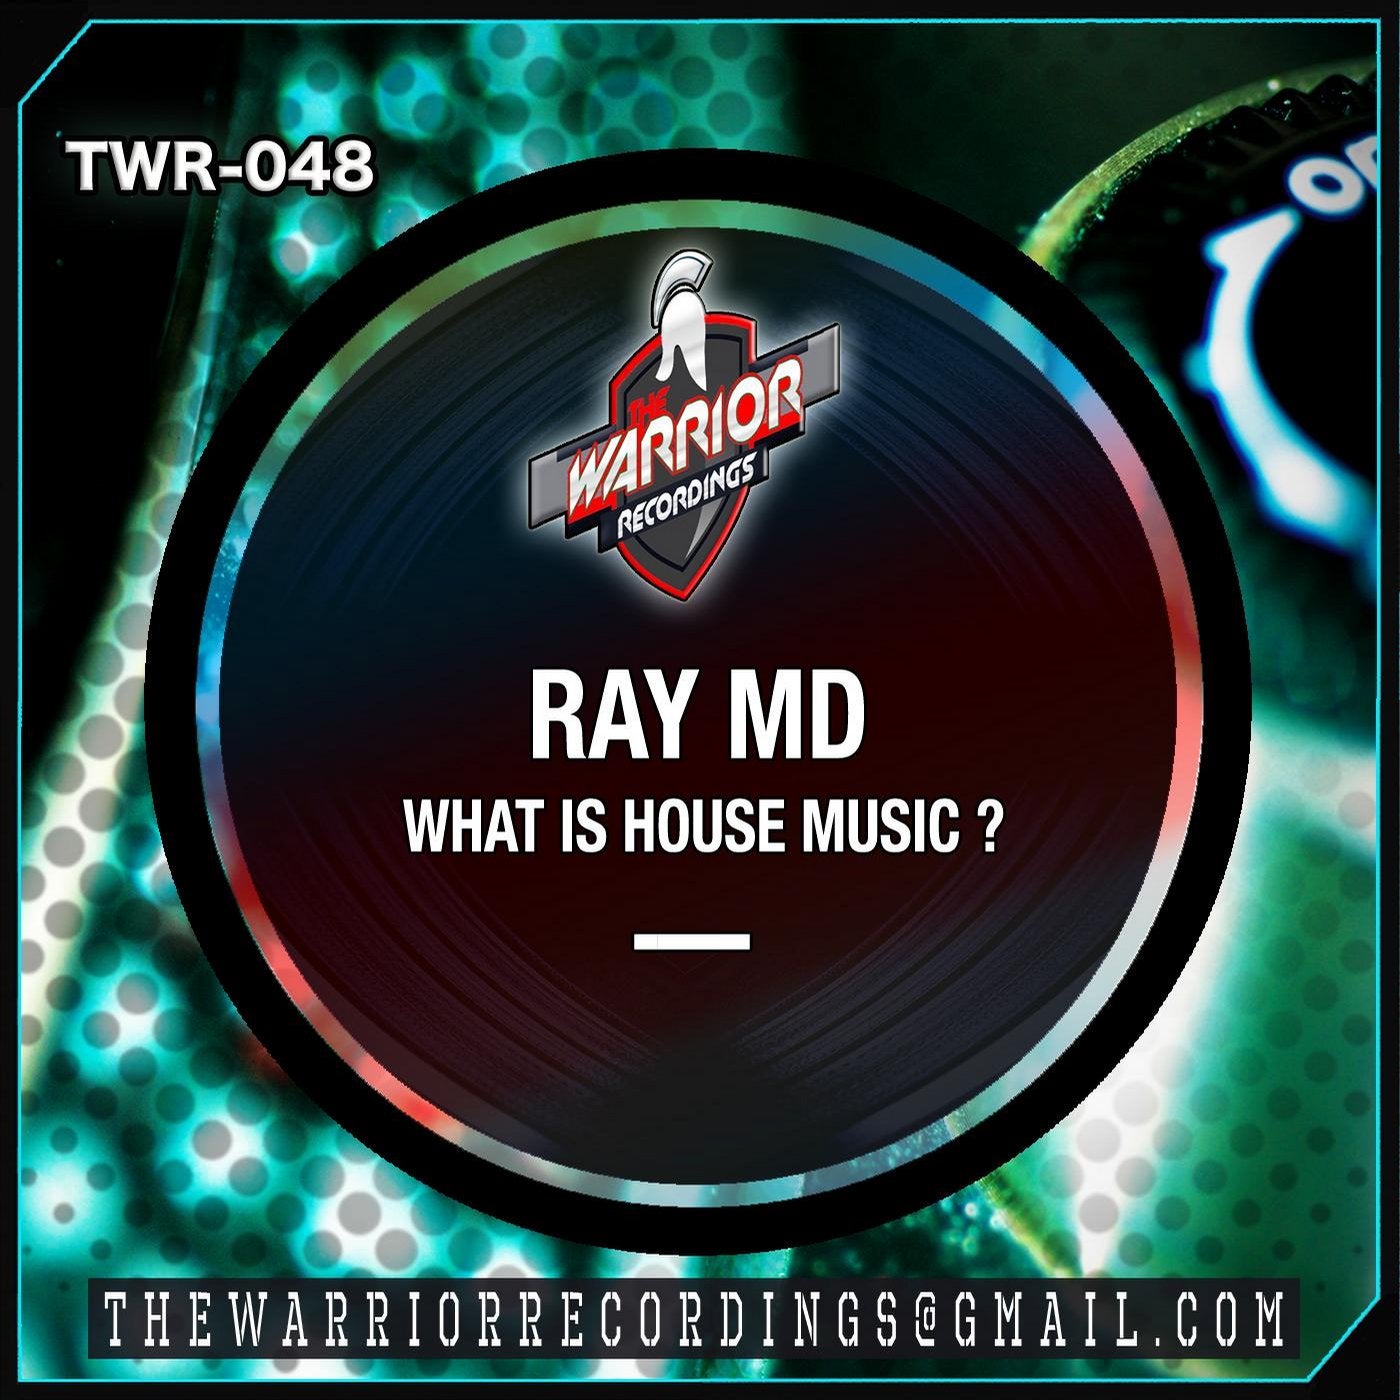 WHAT IS HOUSE MUSIC